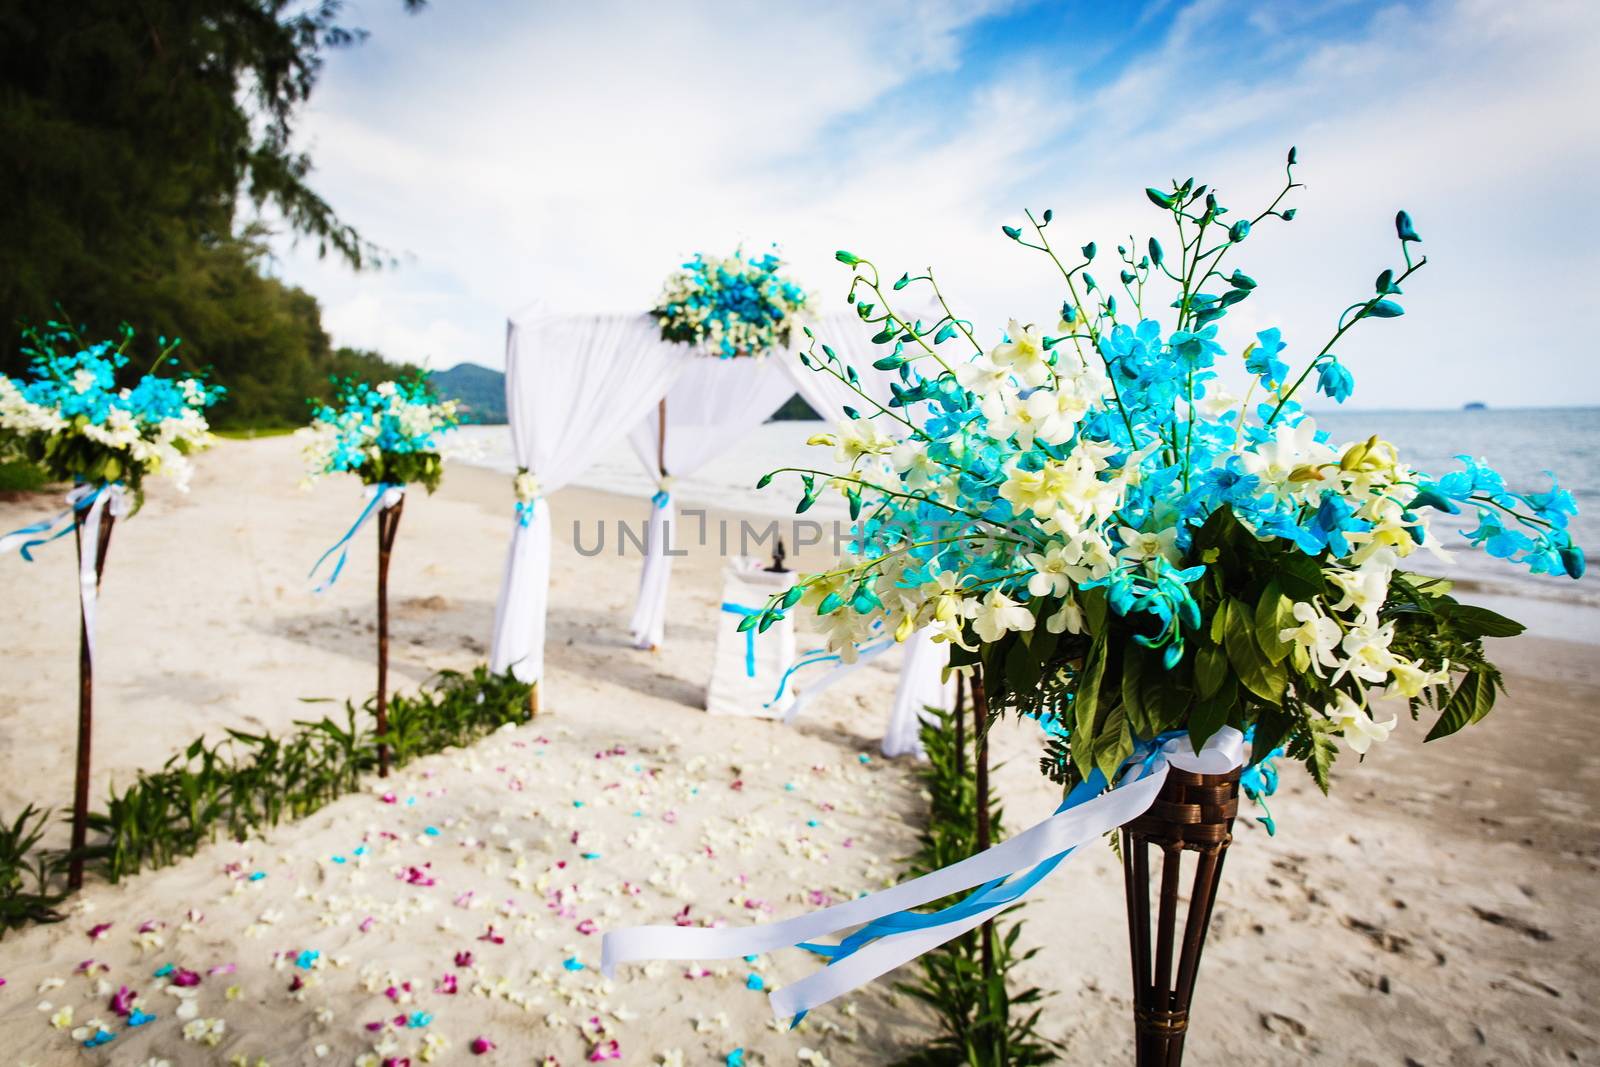 Decorations for wedding ceremony on the beach in Thailand